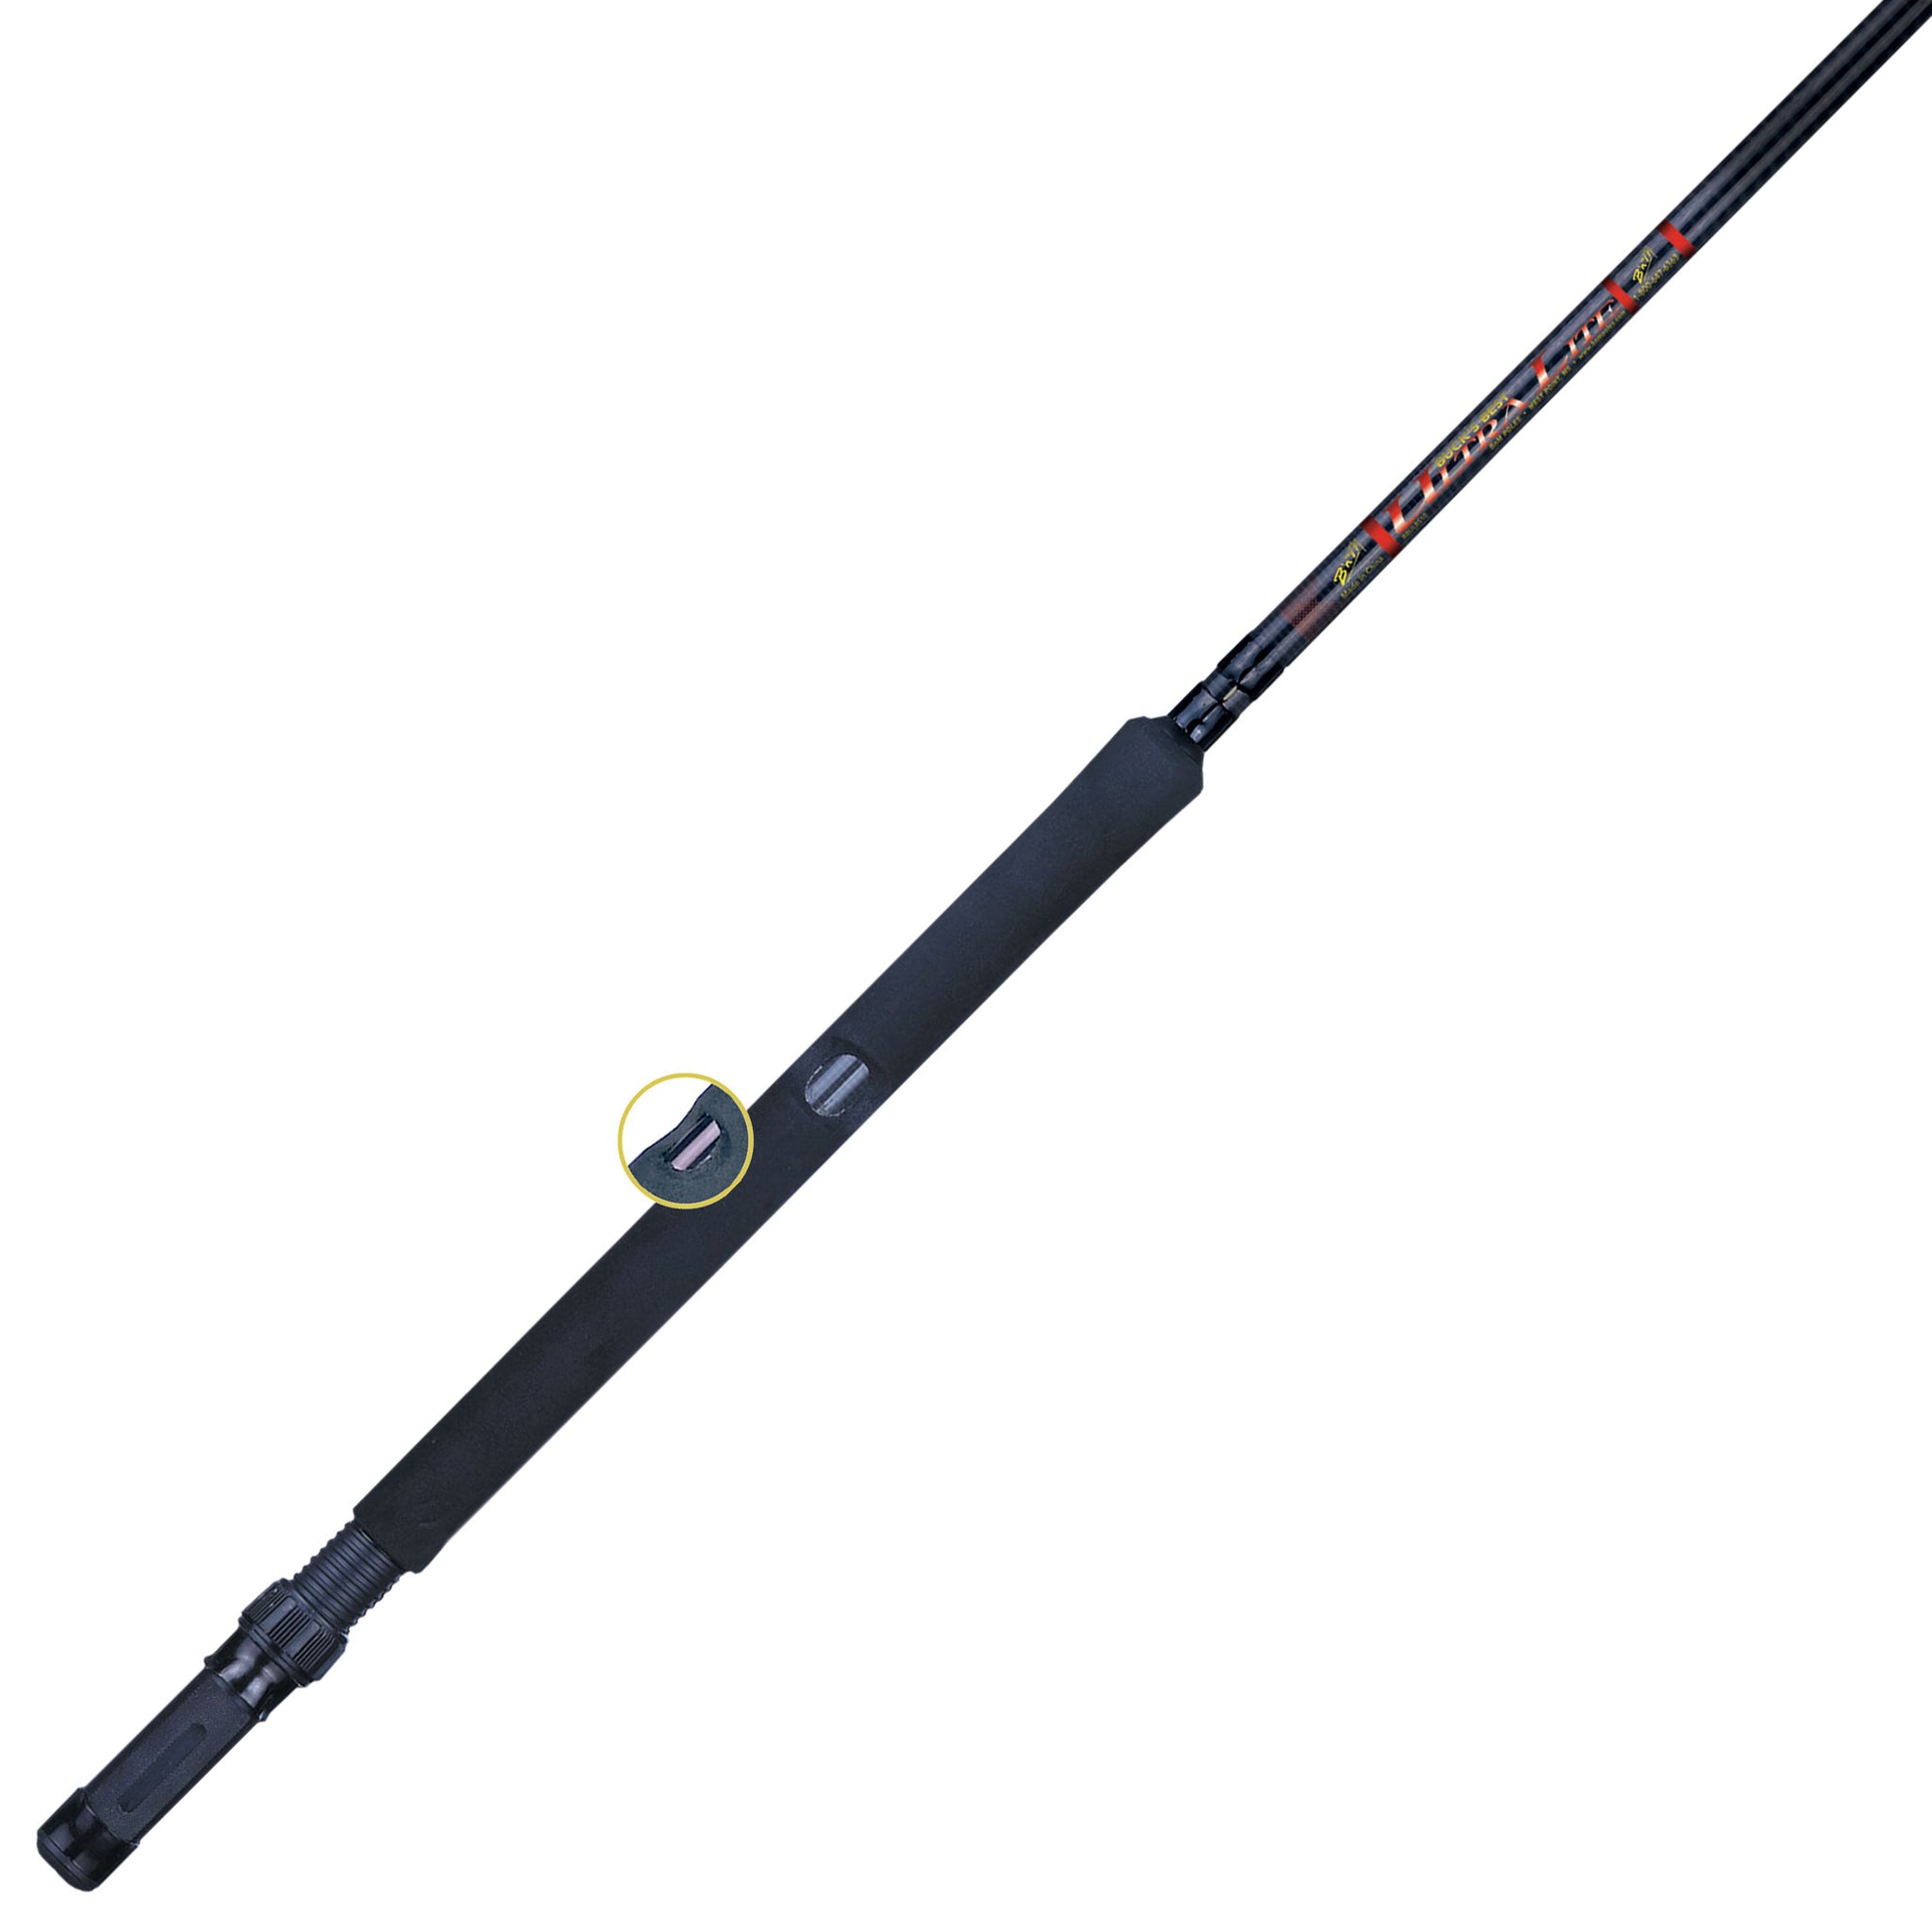  B'n'M Poles - Duck Commander Ultra Lite Crappie Rod, 6 Foot (2  Sections) : General Sporting Equipment : Sports & Outdoors